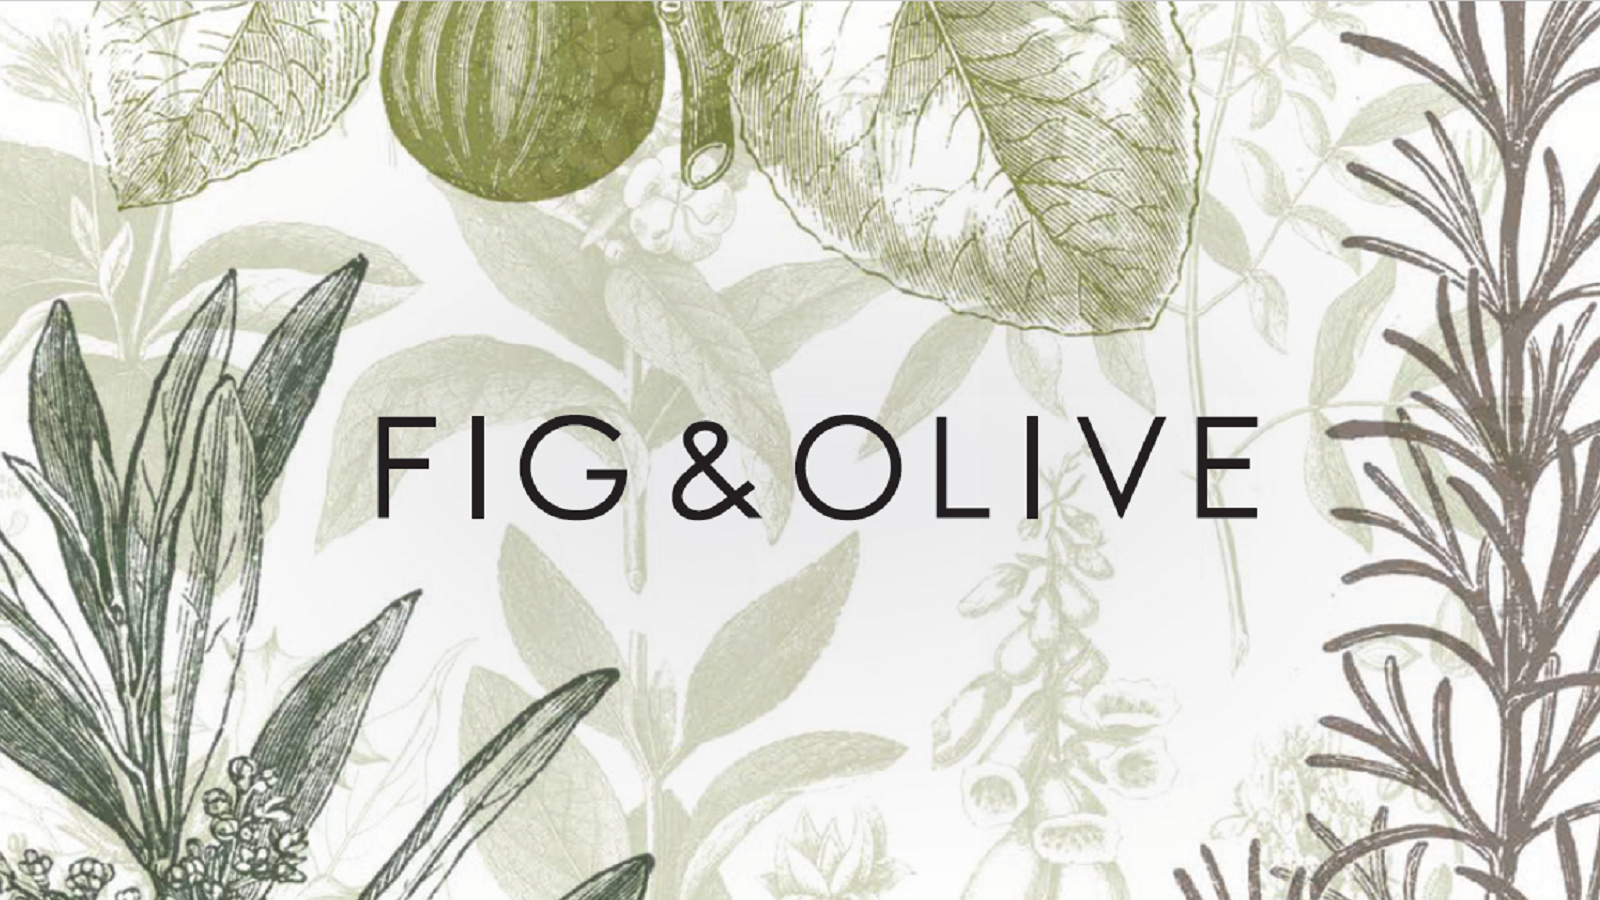 Nurture Your Creativity with Fig & Olive’s Visual Identity